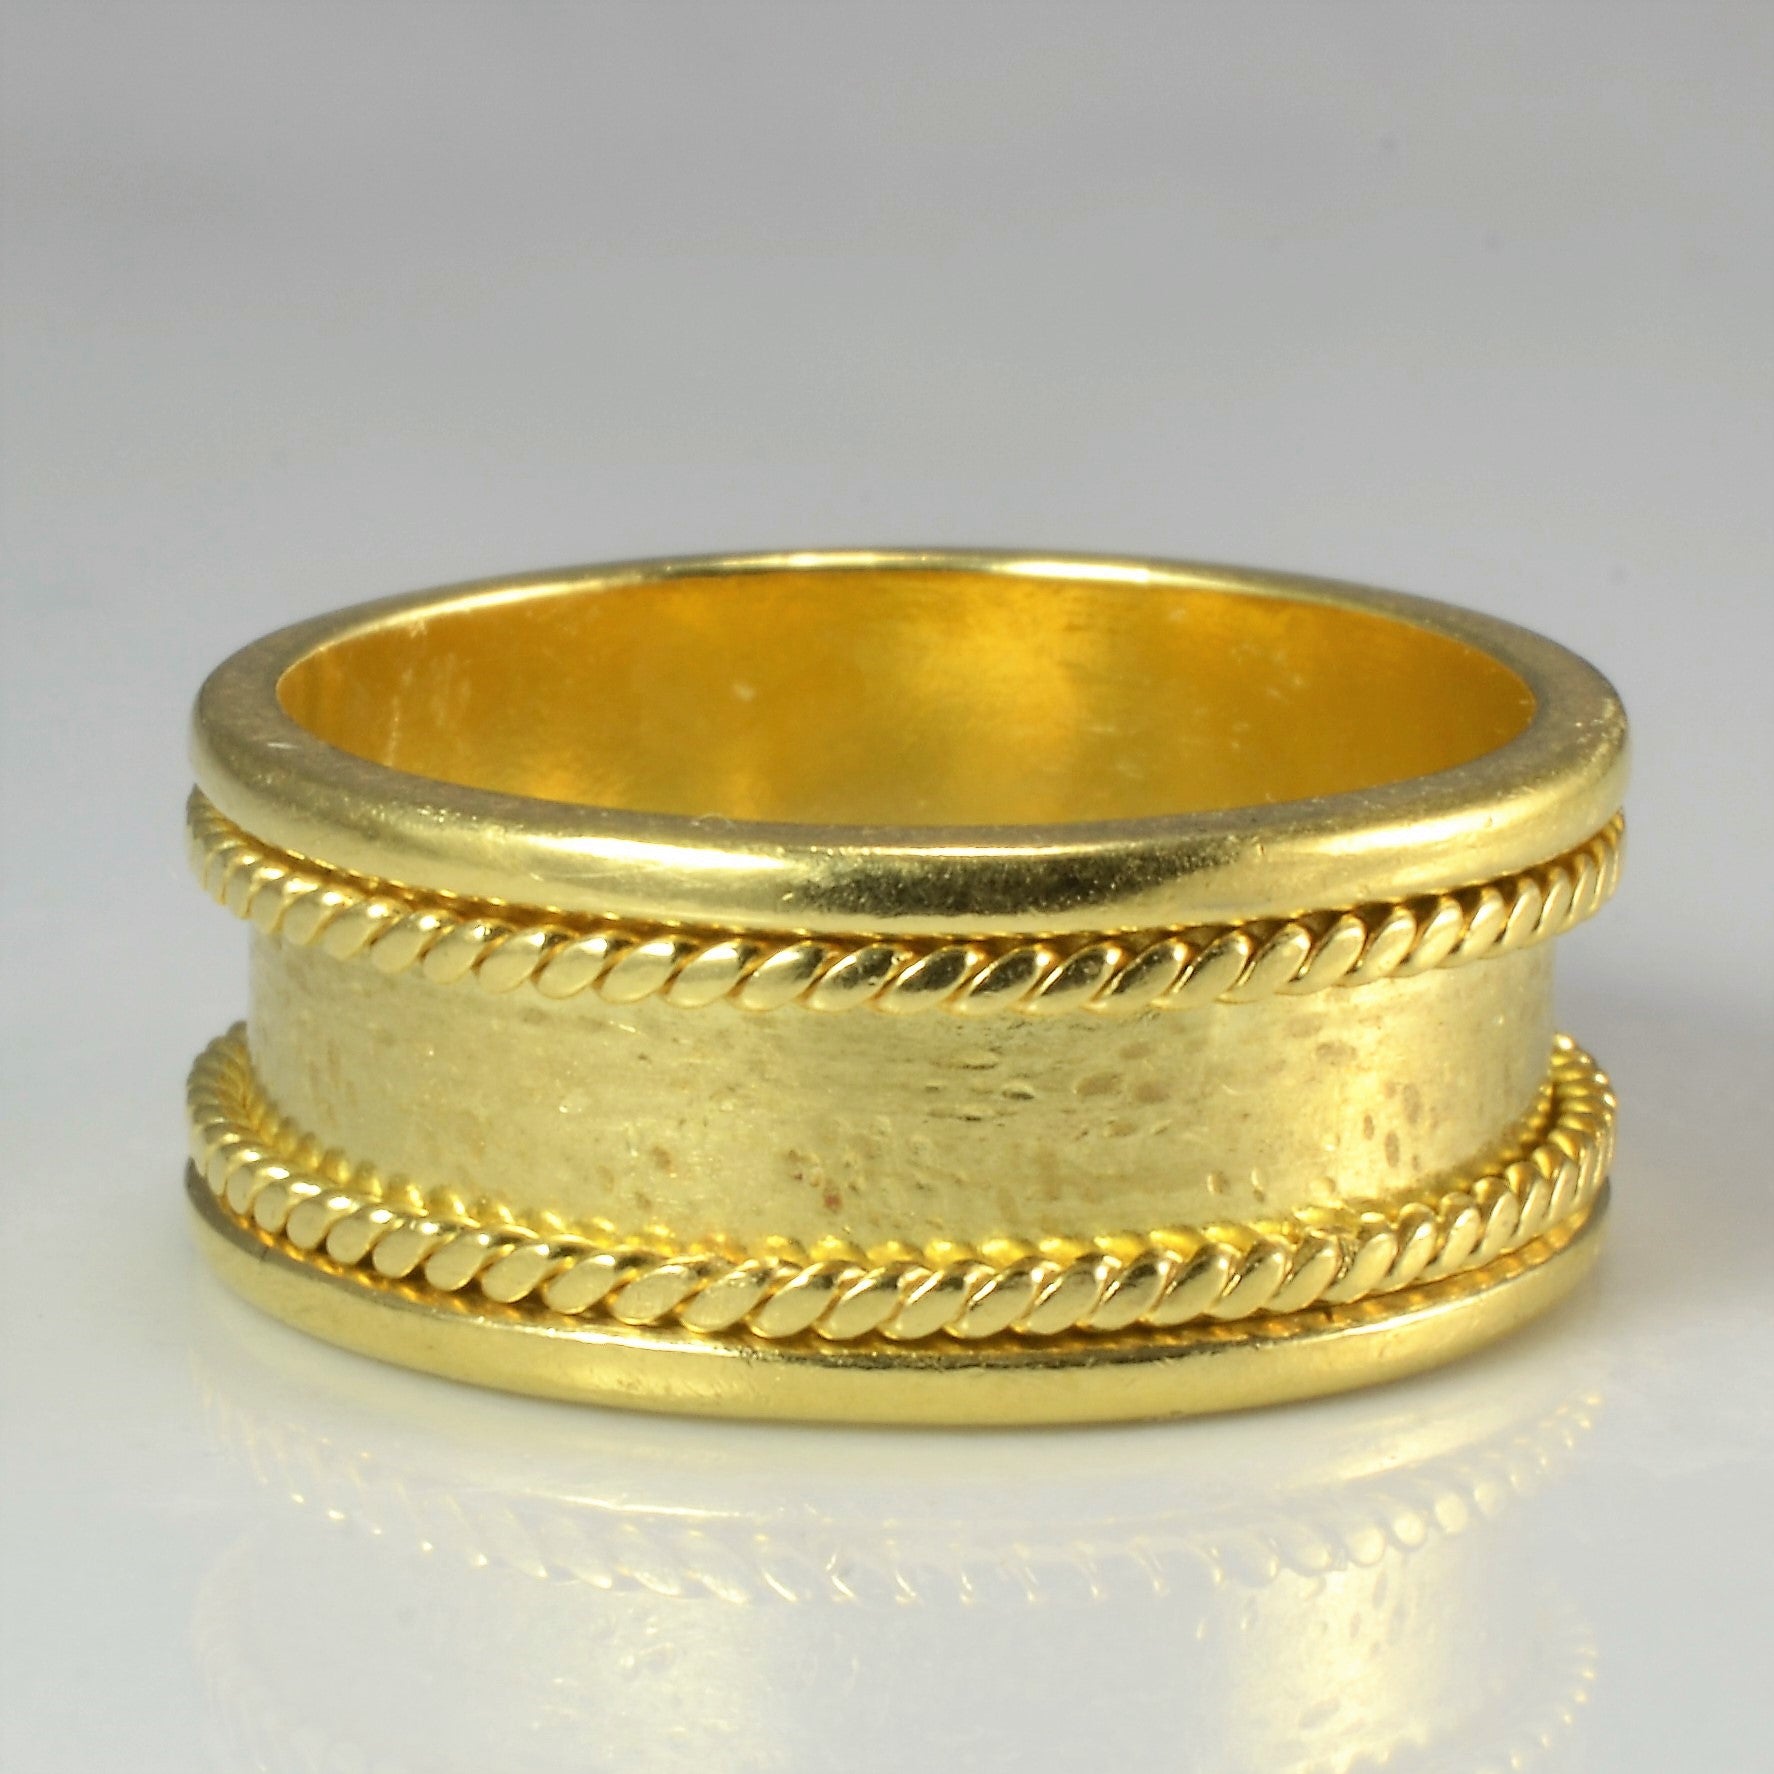 'Birks' Twisted Band Spinner Ring | SZ 5.5 |